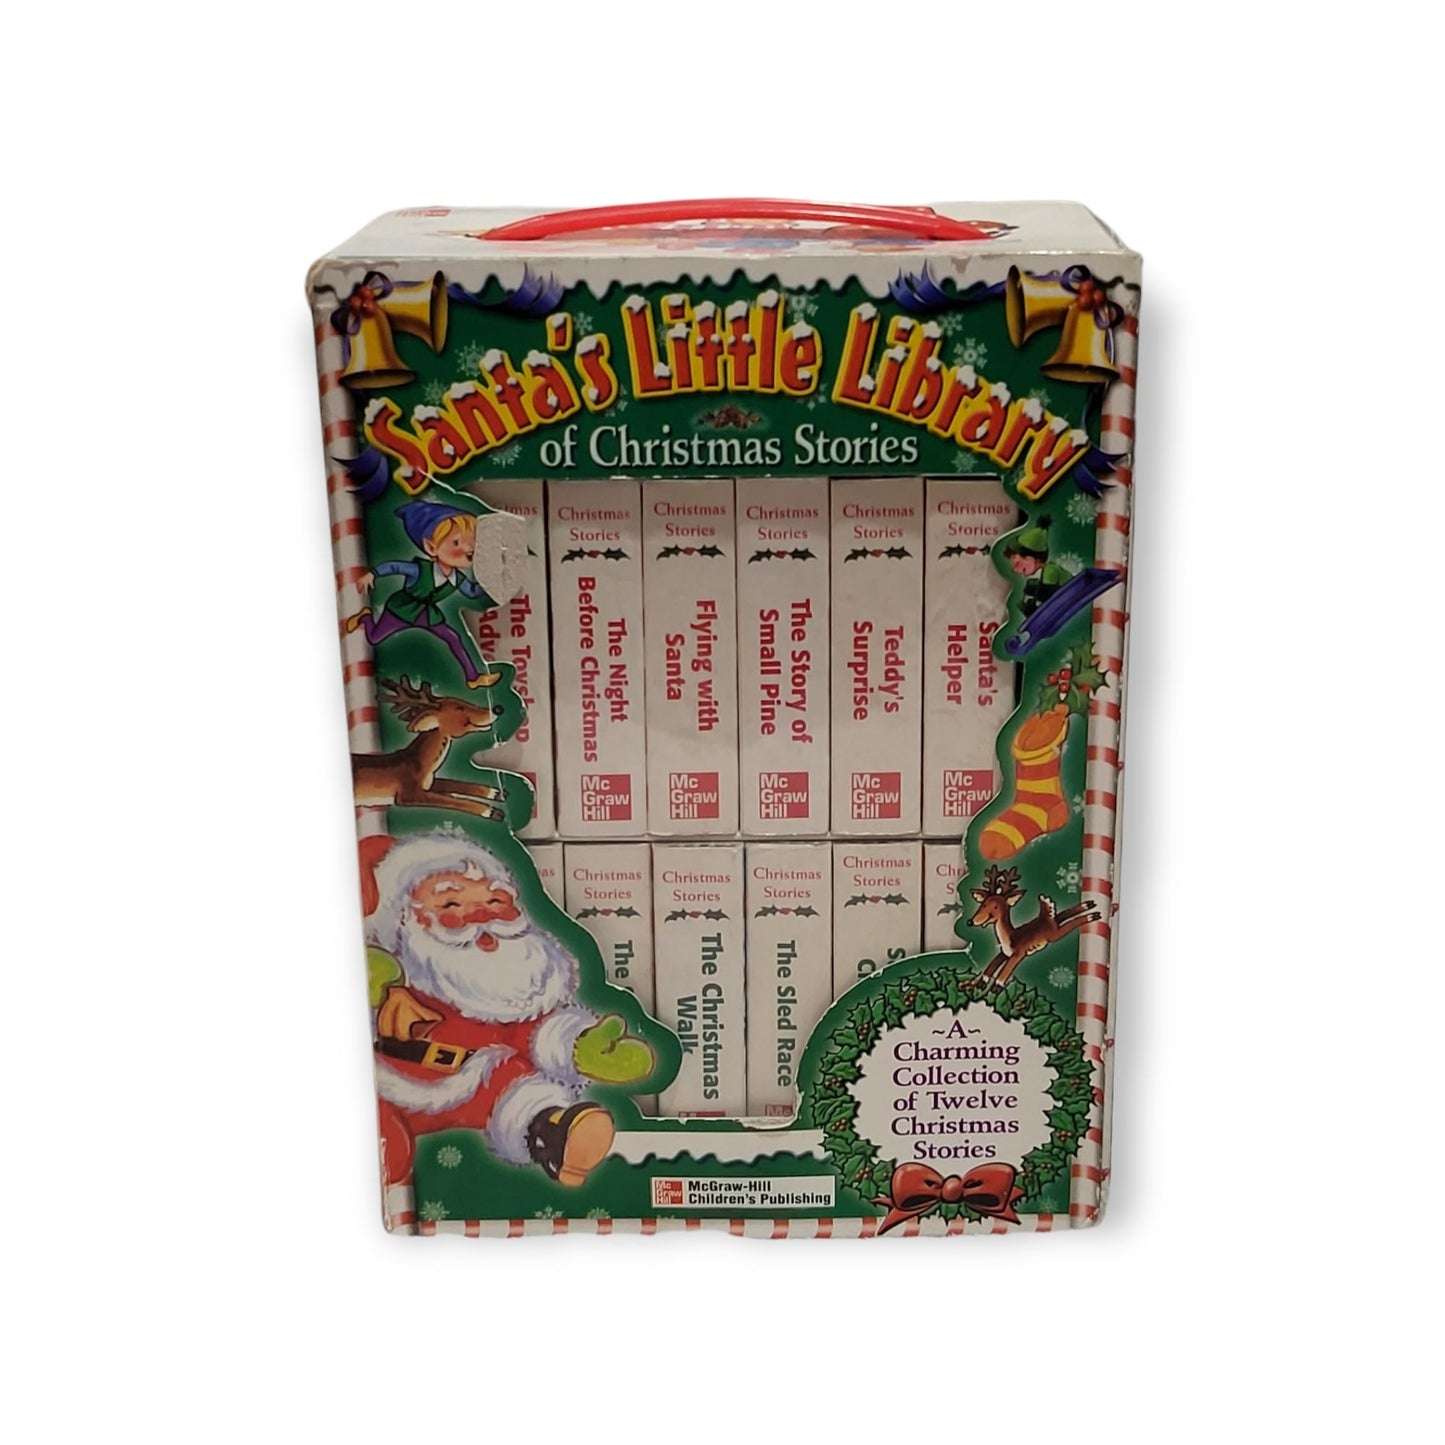 Santa's Little Library of Christmas Stories | 12 Stories